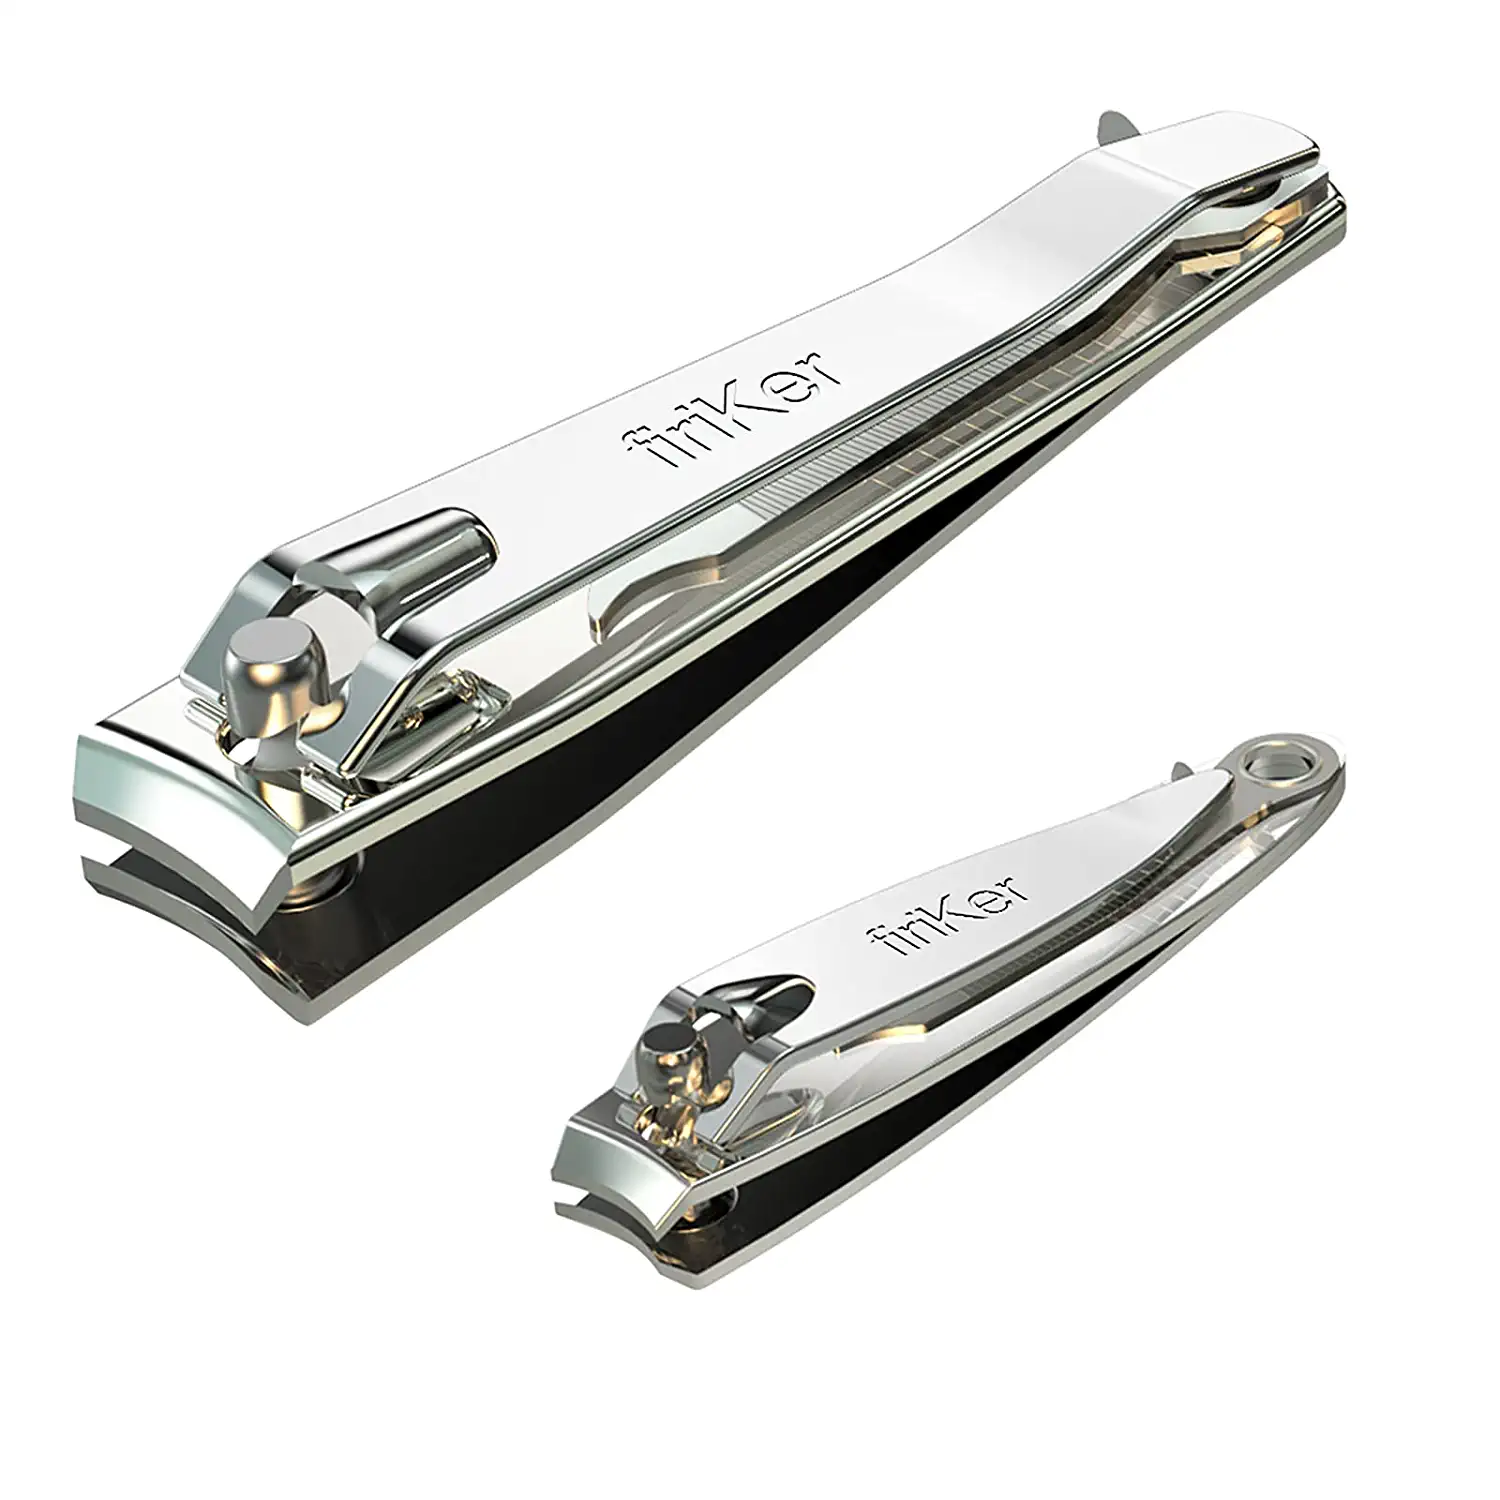 Harperton Nail Clippers Set - 2 Pack Stainless Steel, Professional Fingernail & Toenail Clippers for Thick Nails